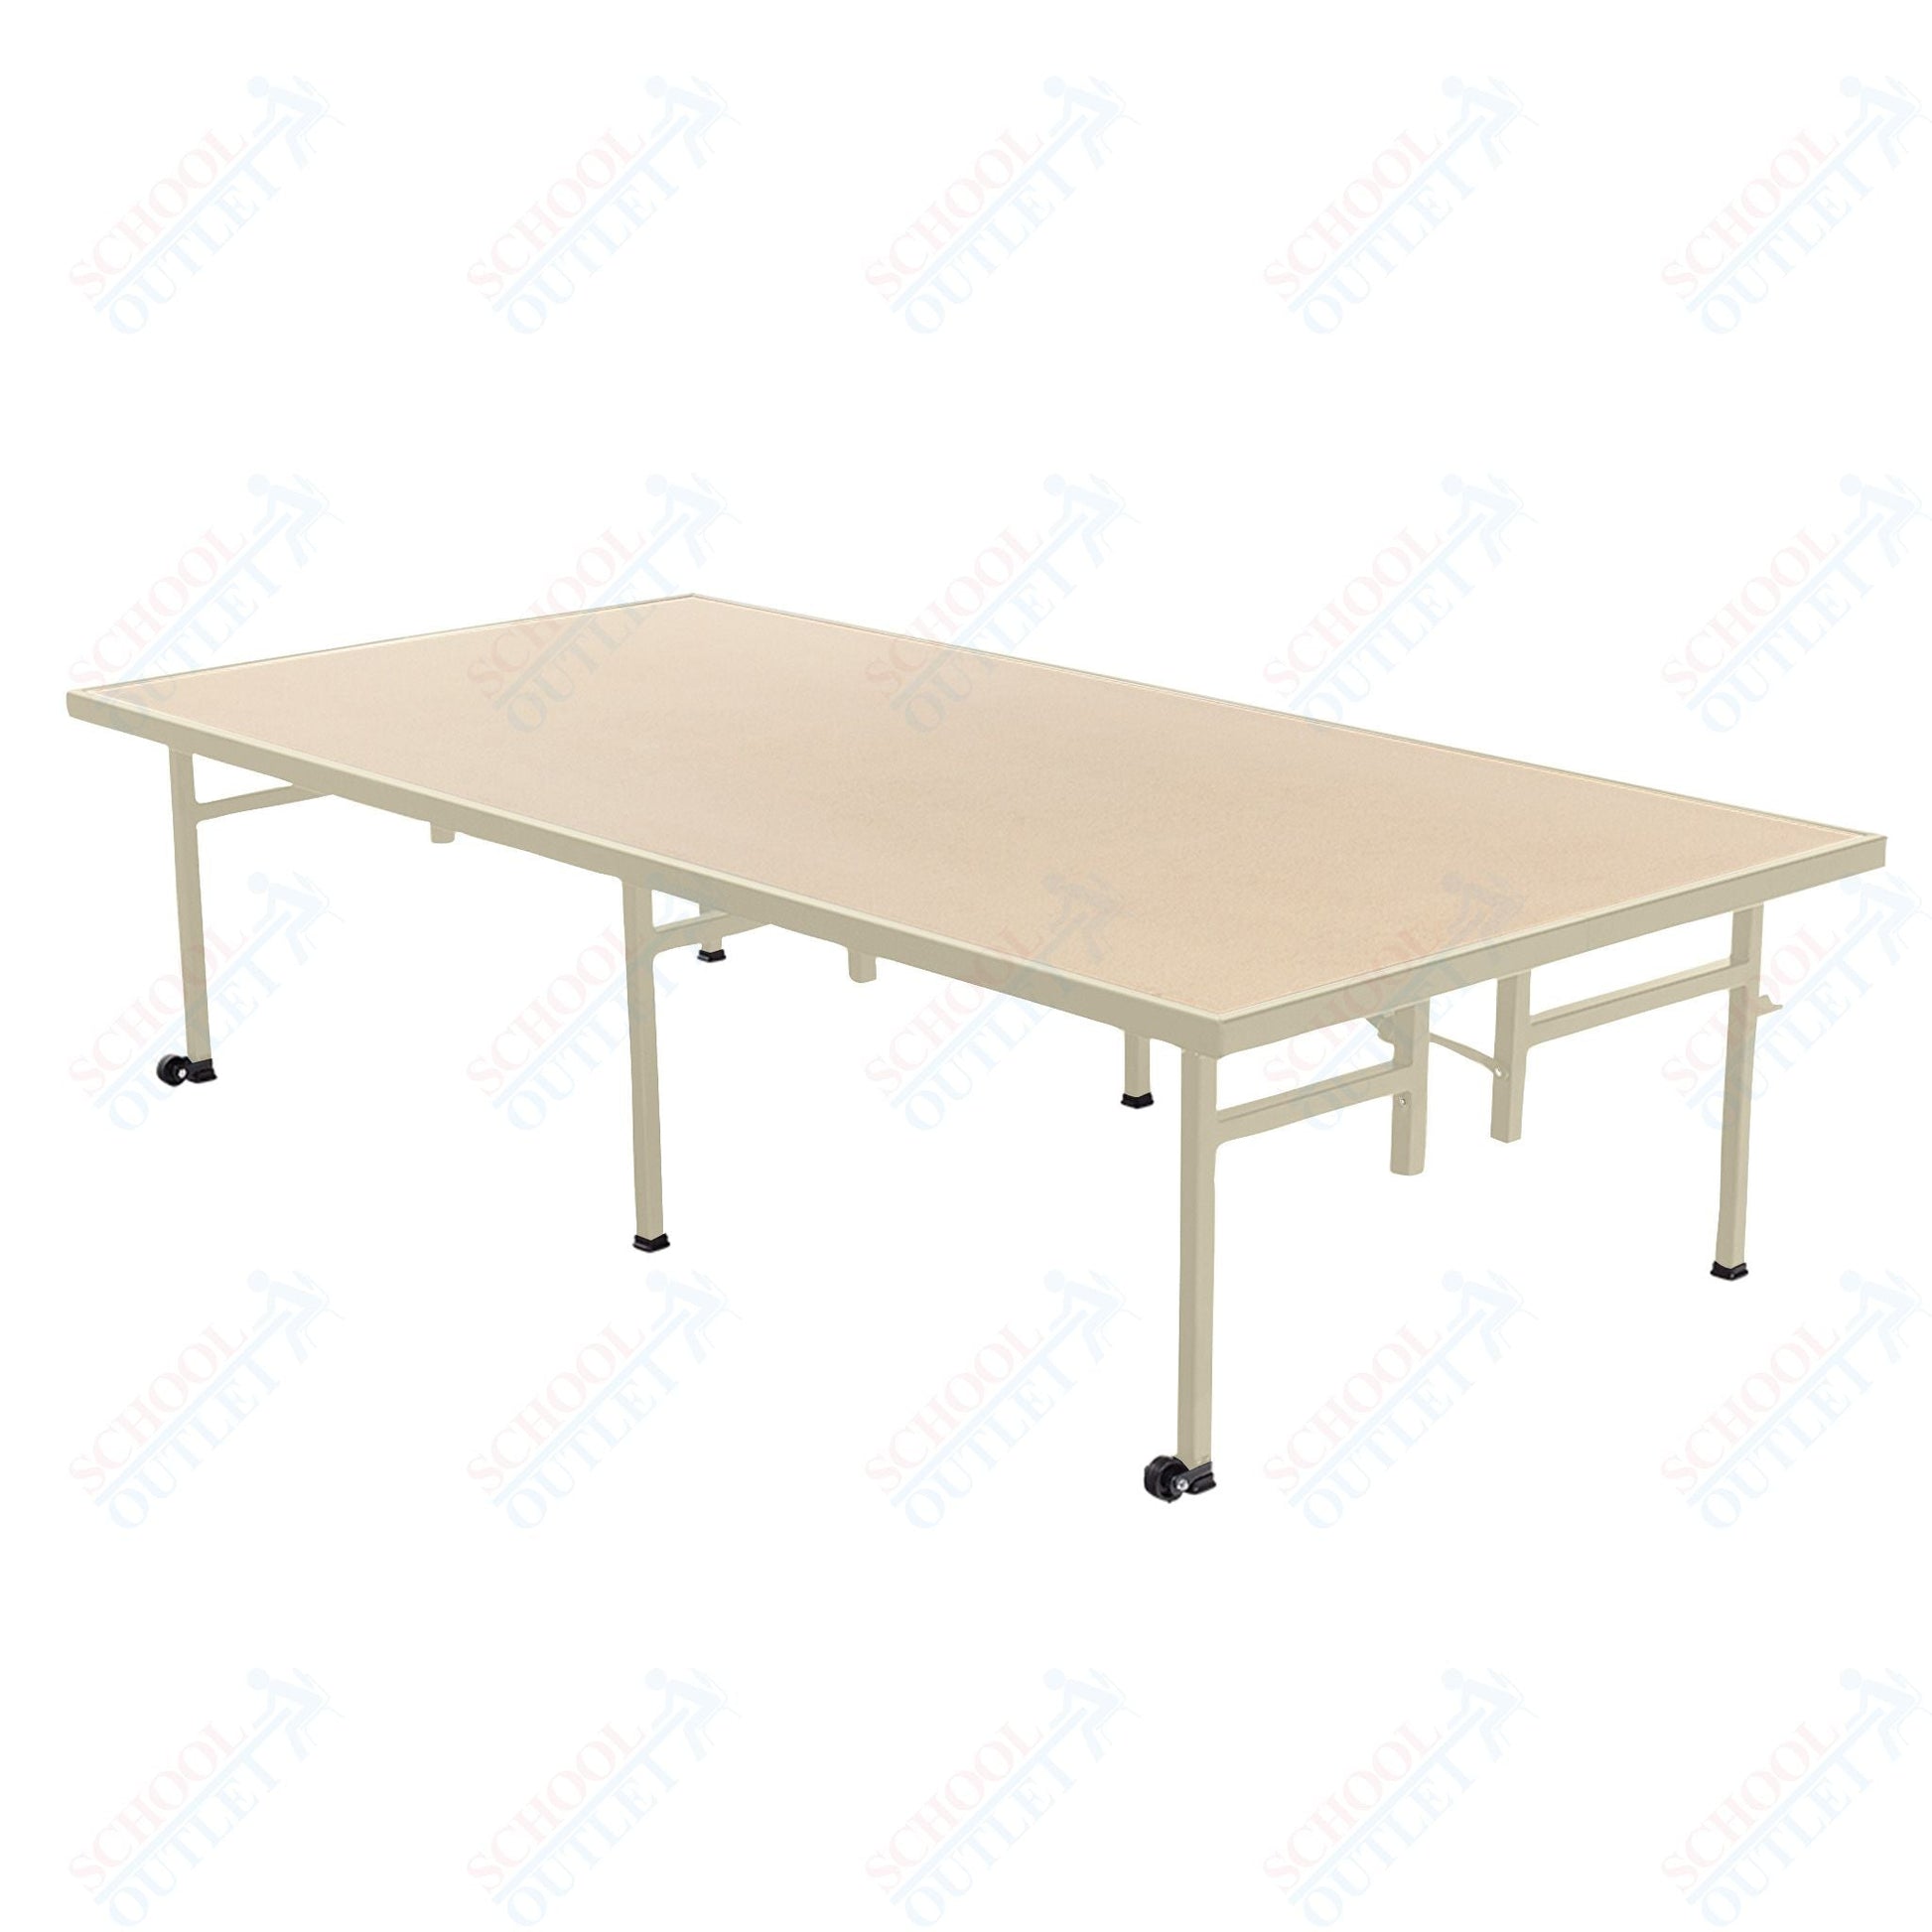 AmTab Fixed Height Stage - Hardboard Top - 36"W x 48"L x 16"H (AmTab AMT - ST3416H) - SchoolOutlet